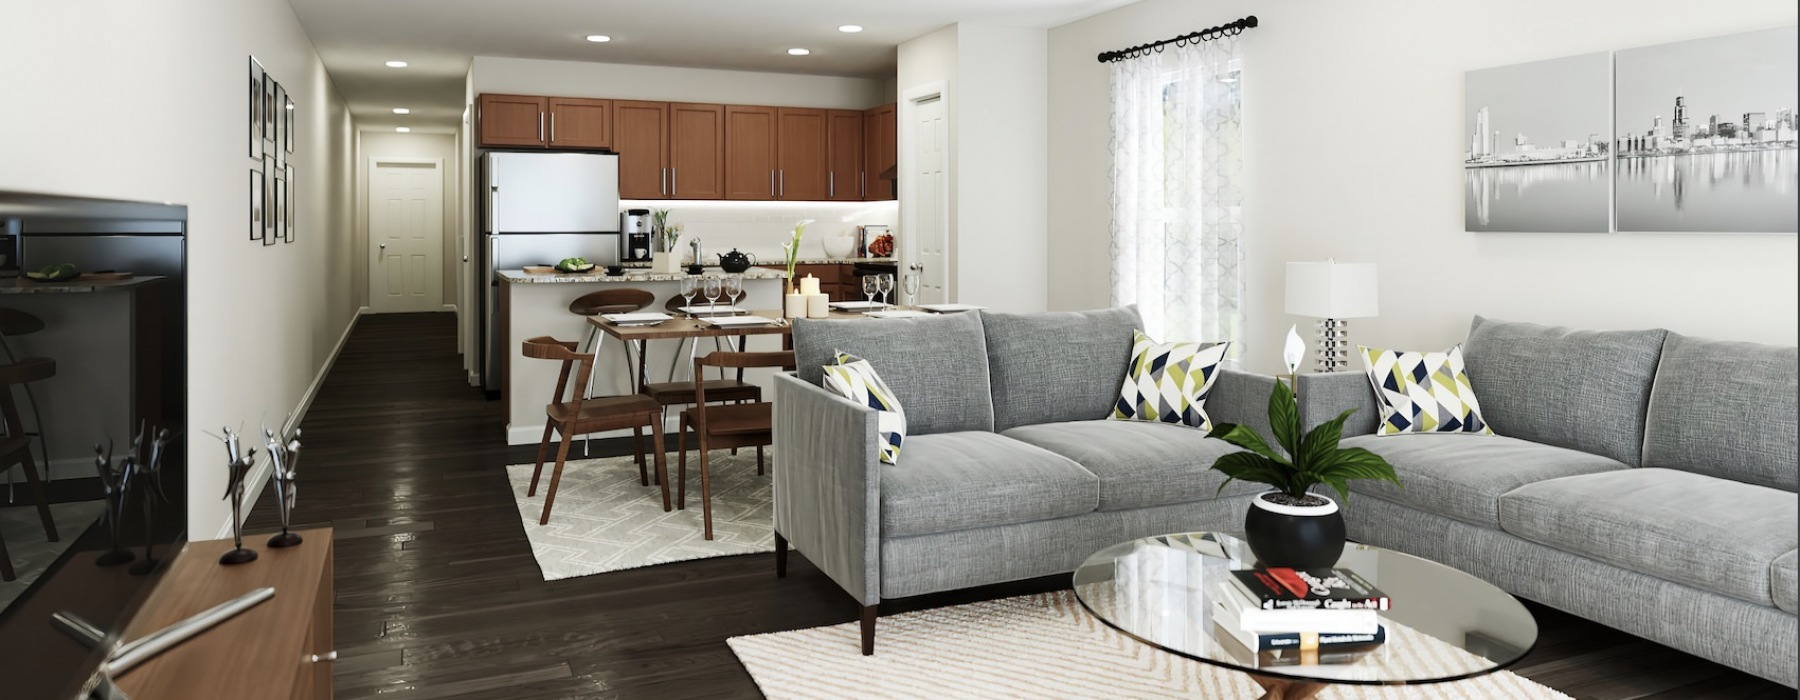 Rendering of The Harper Trout River townhome living room and kitchen